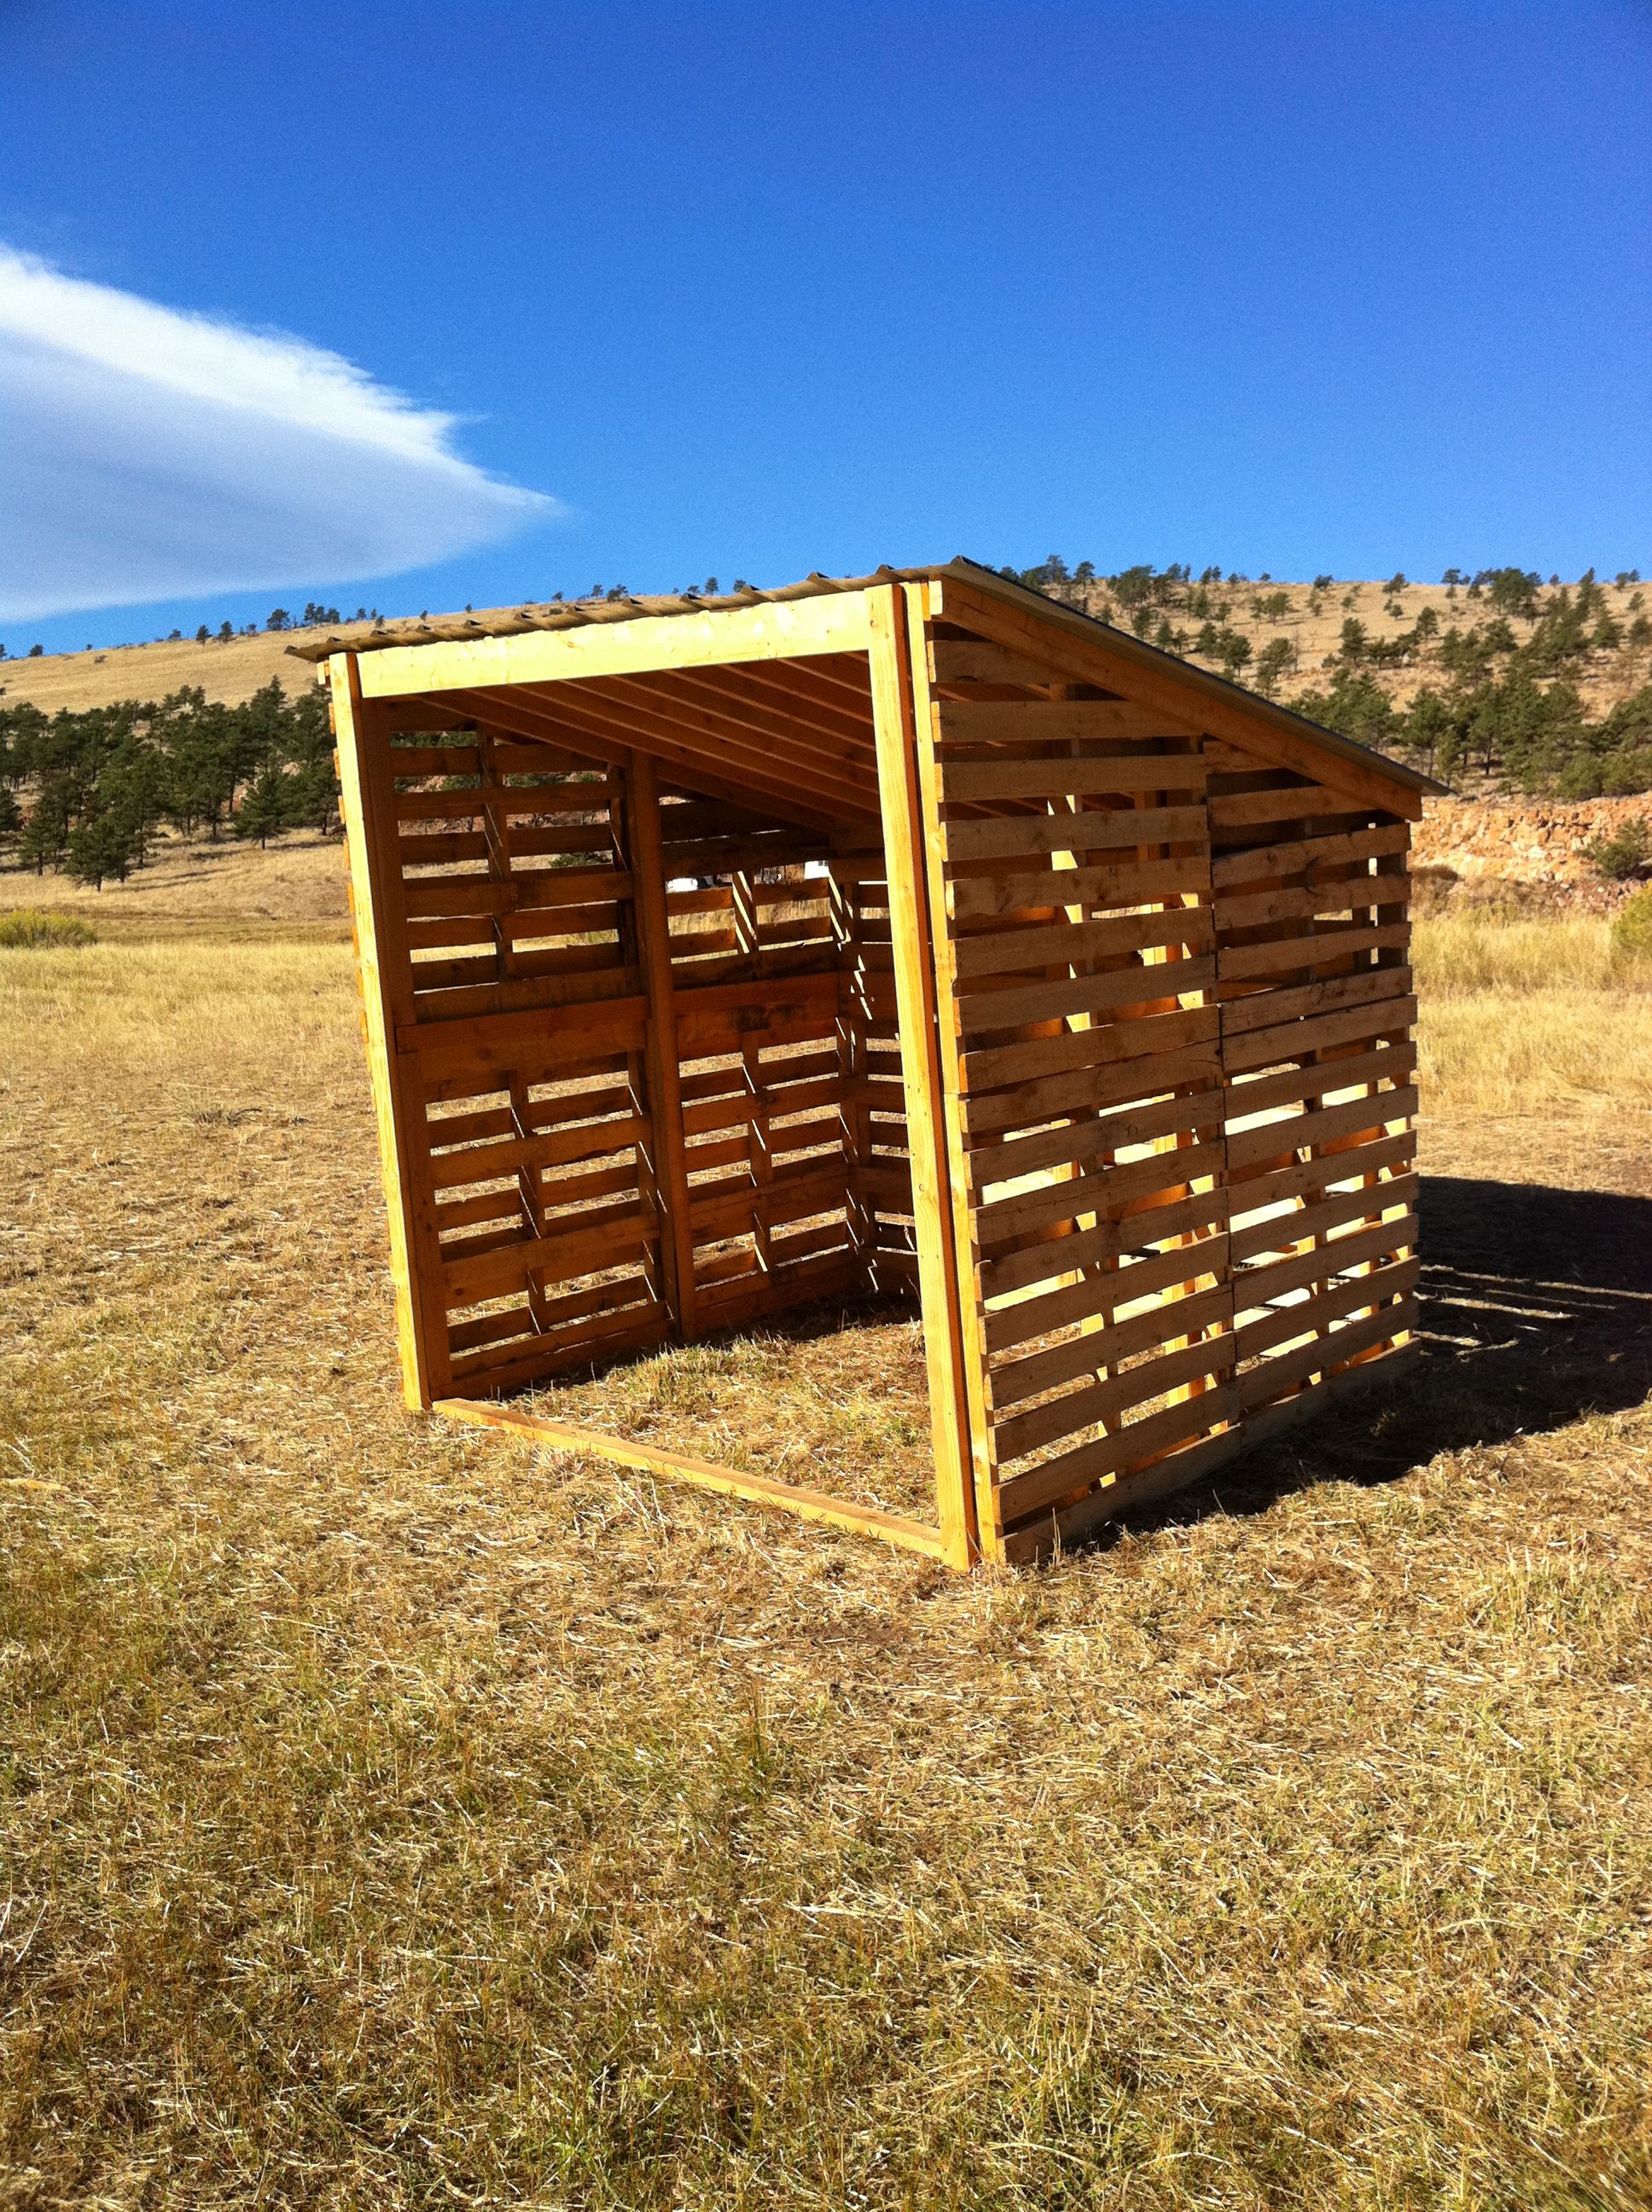 Build Things From Pallets shed | livestock pallet barn in a ...